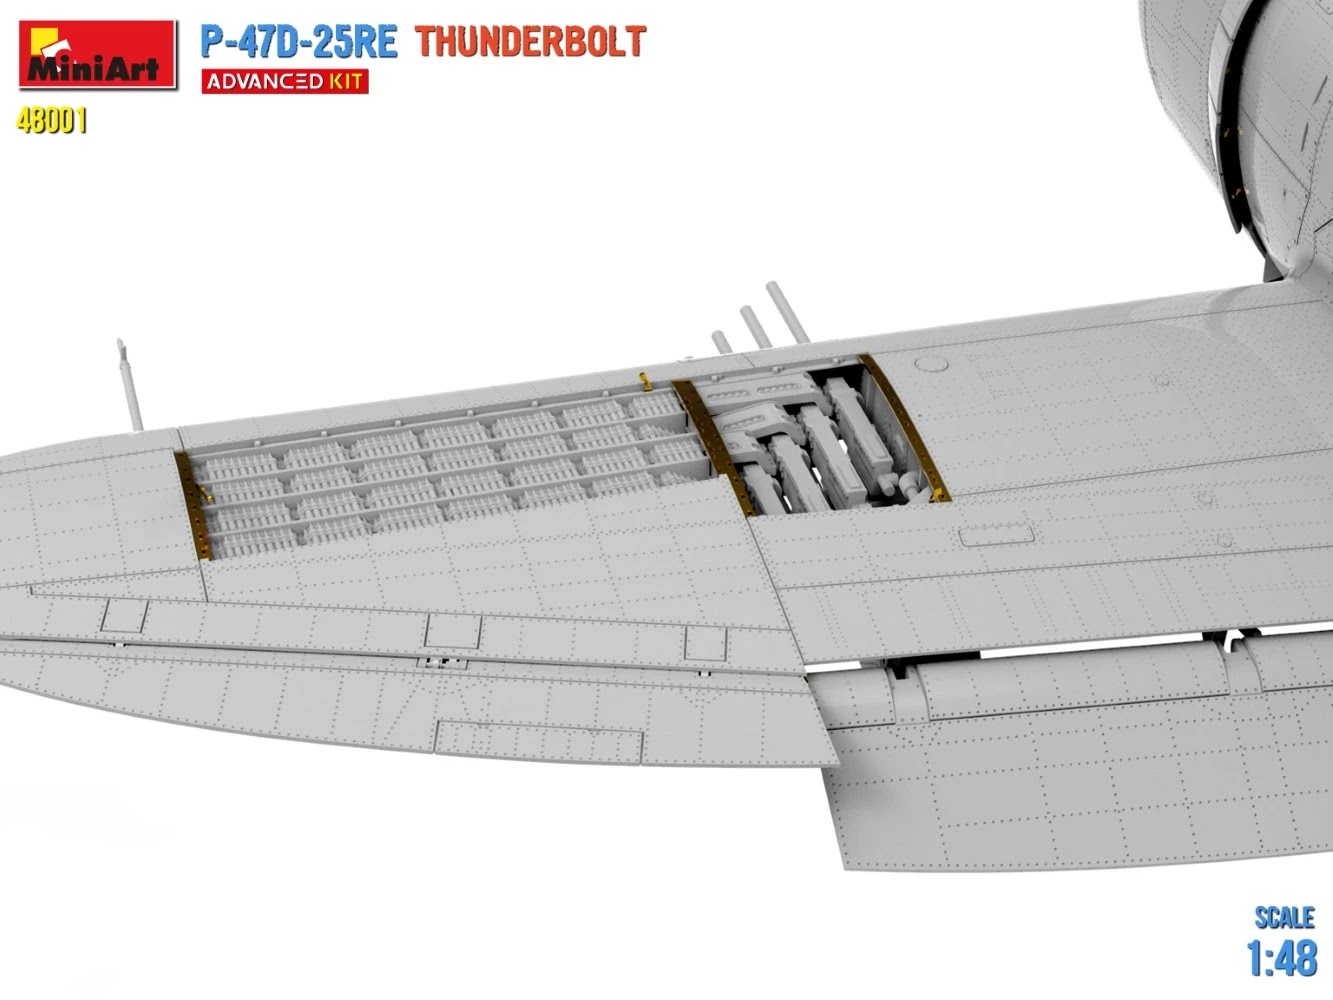 MiniArt ups the detail on their P-47D CAD-6